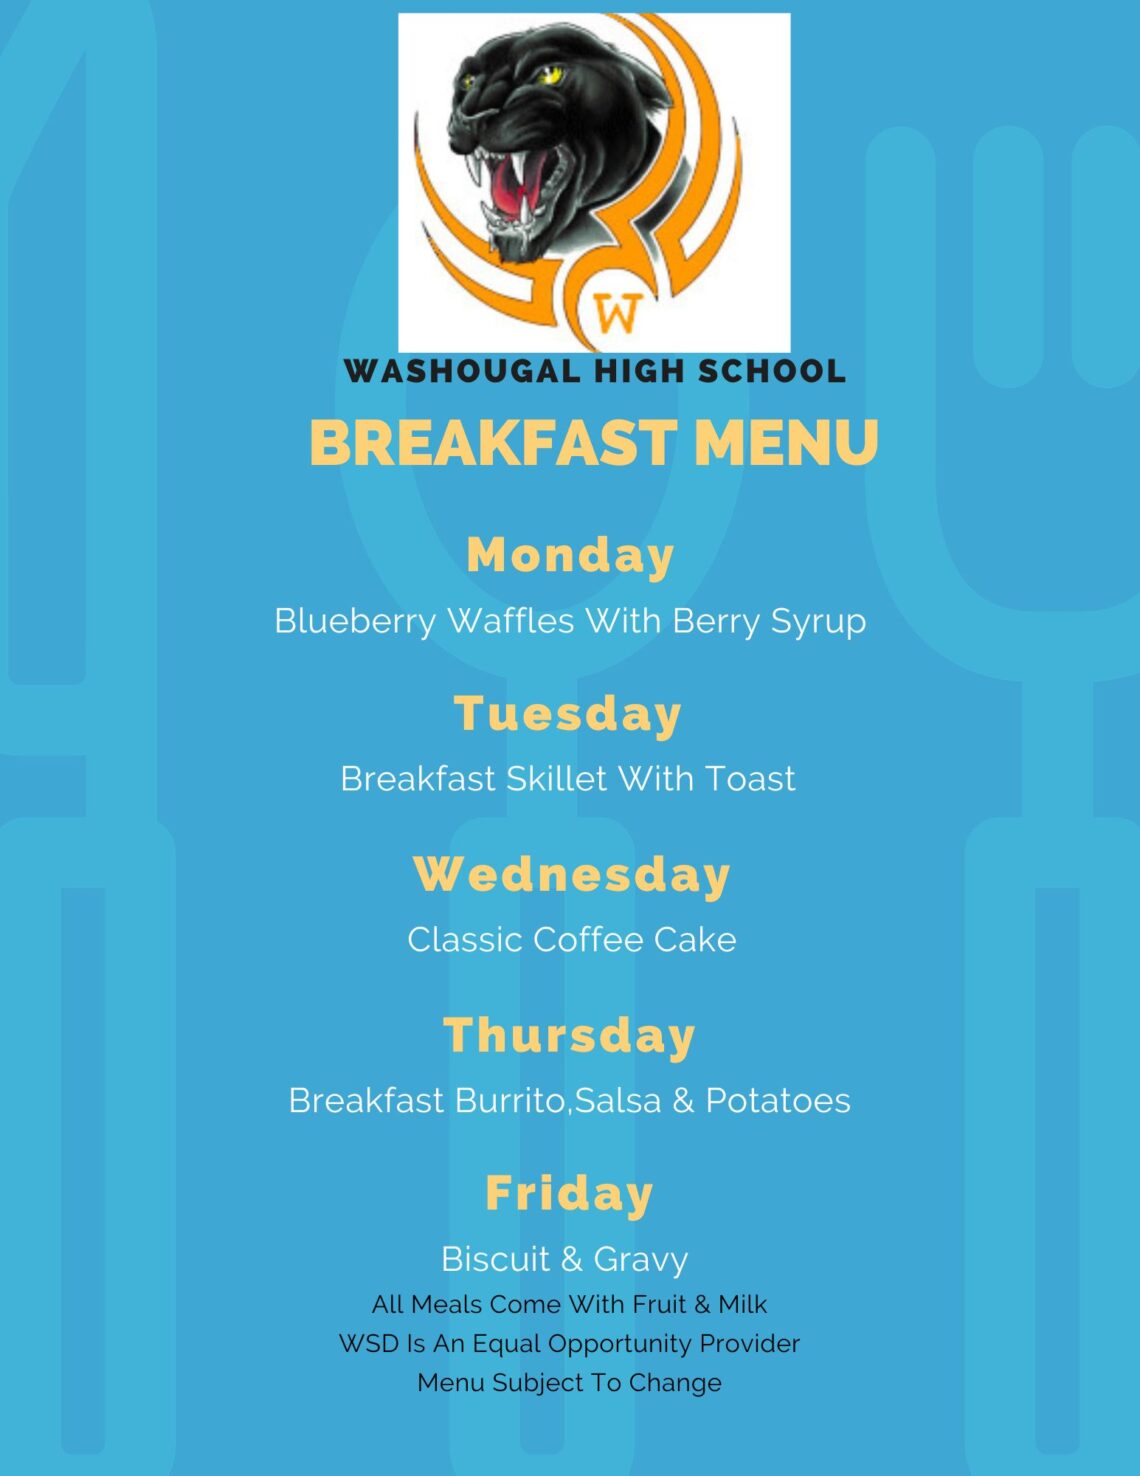 WHS Breakfast menu, click for accessible version